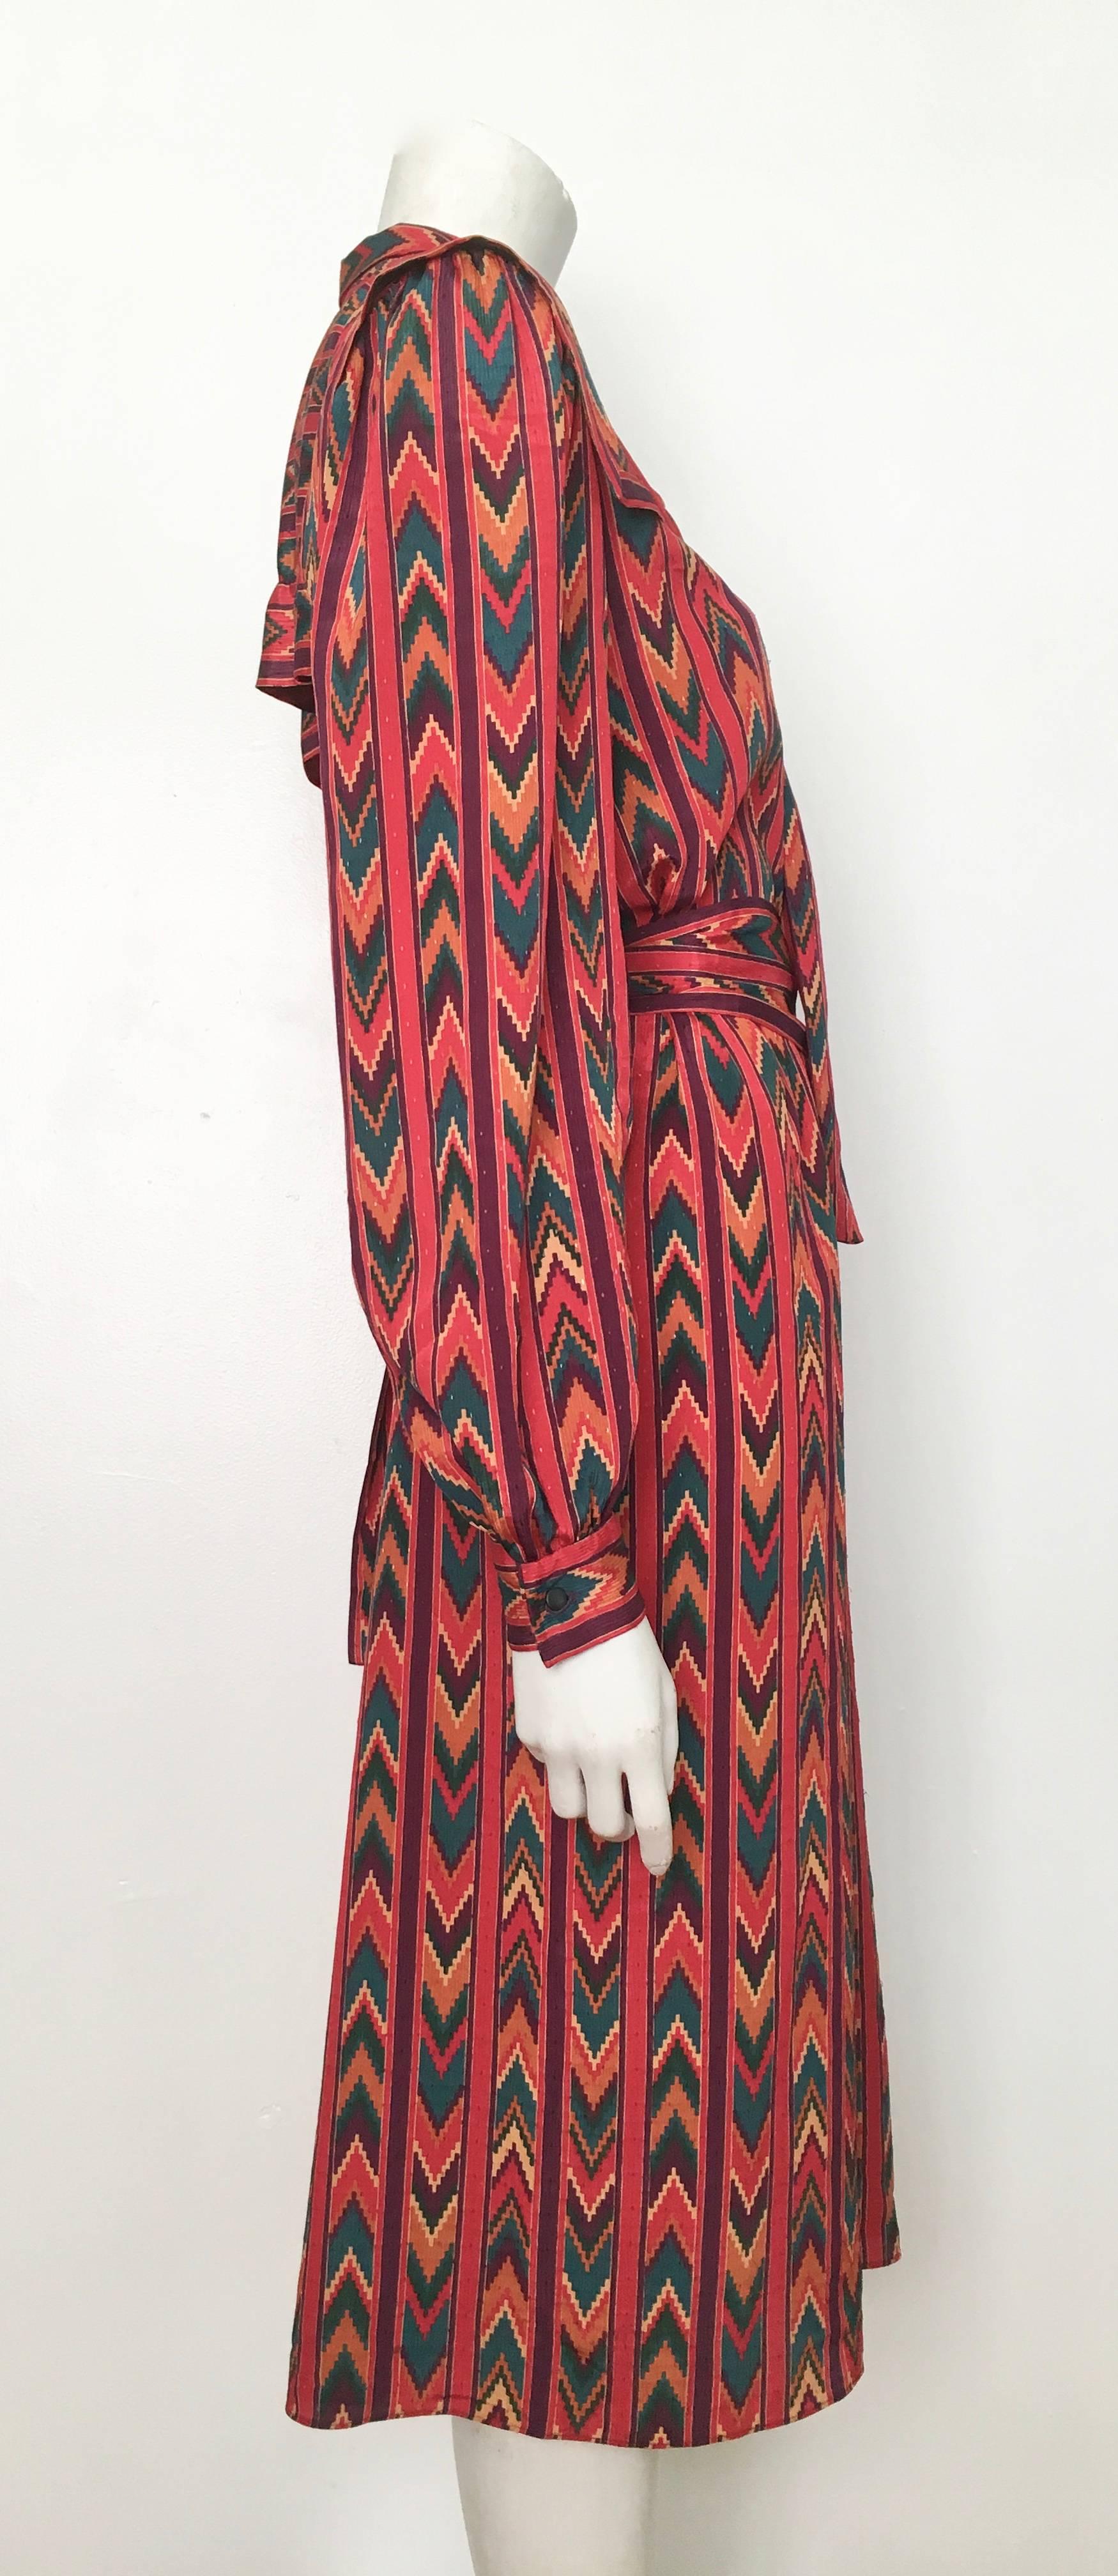 Brown Molly Parnis 1980s Native American Print Dress Size 10. For Sale